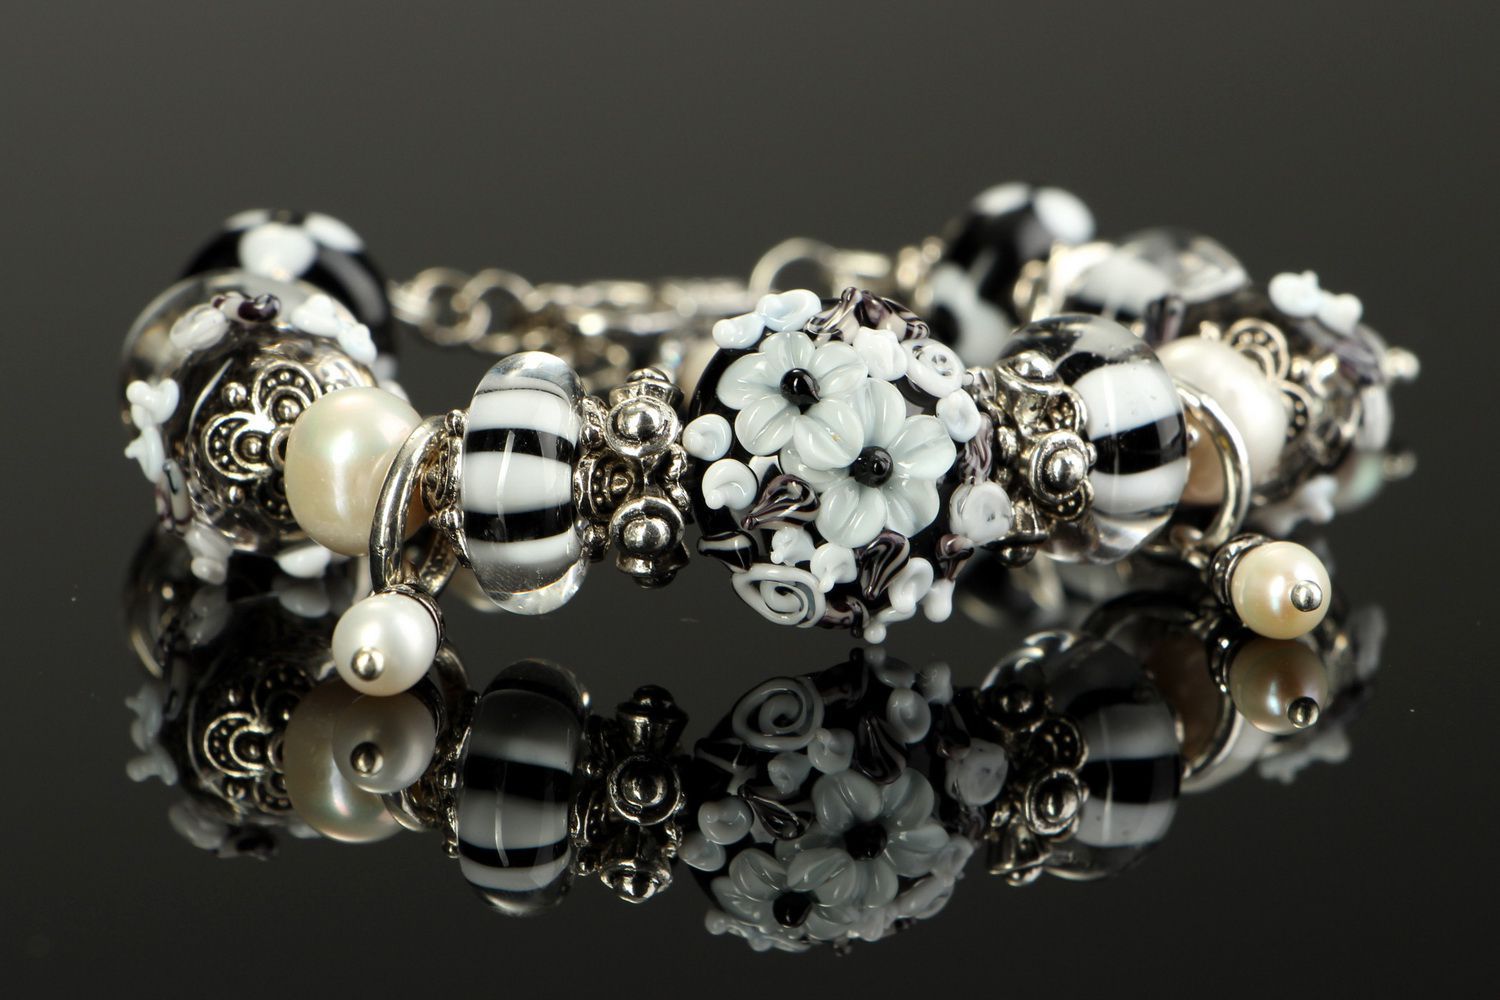 Wrist bracelet with river pearls and glass beads Garden of Eden photo 3